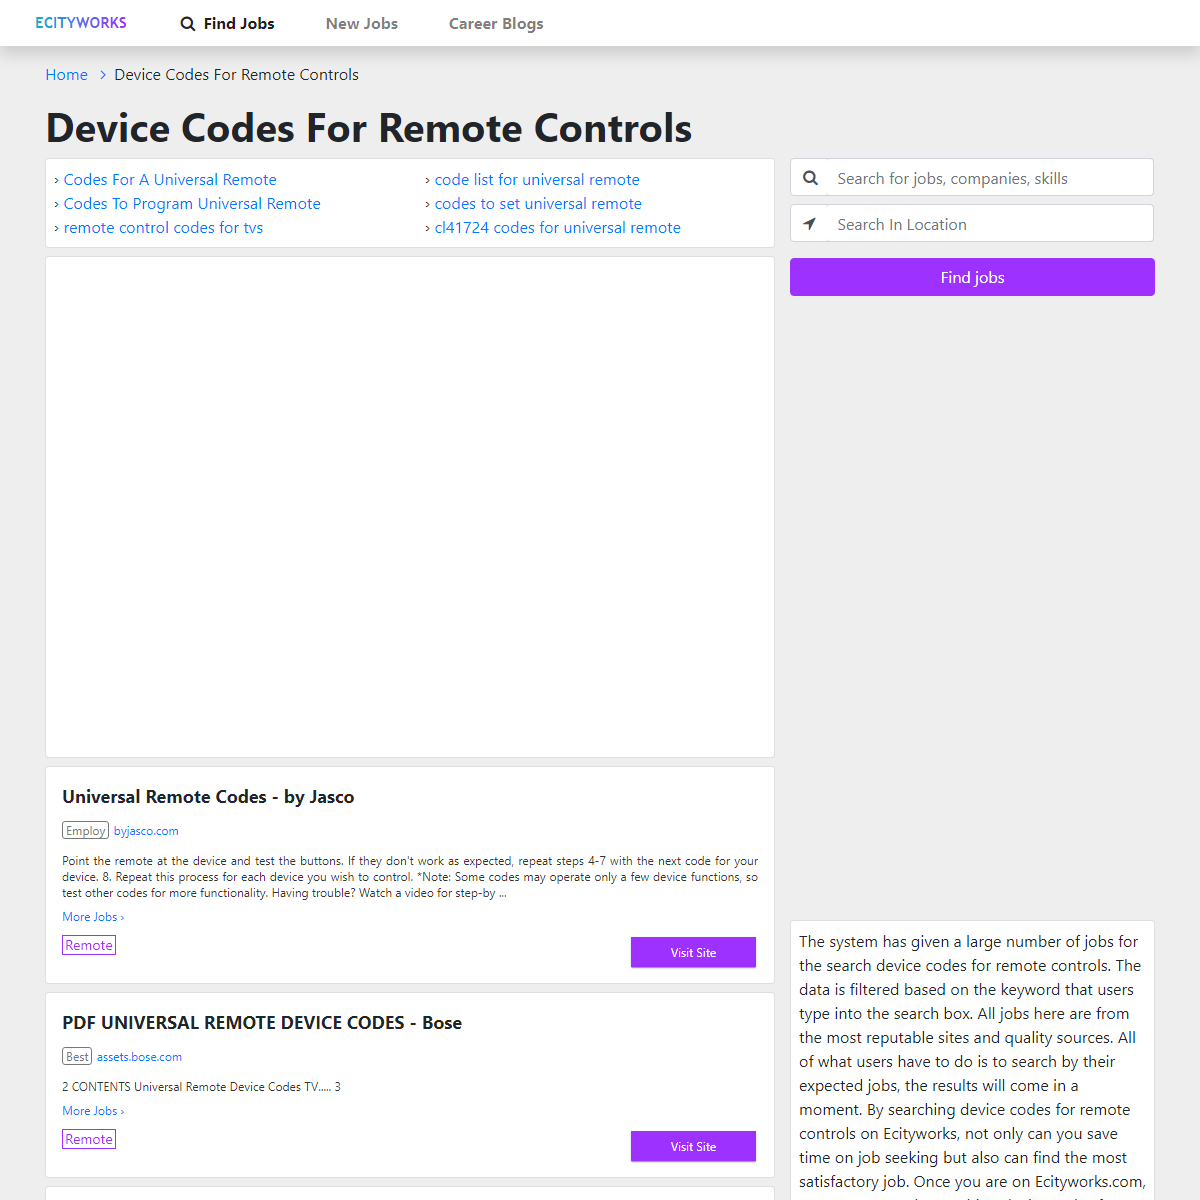 A complete backup of https://www.ecityworks.com/device-codes-for-remote-controls